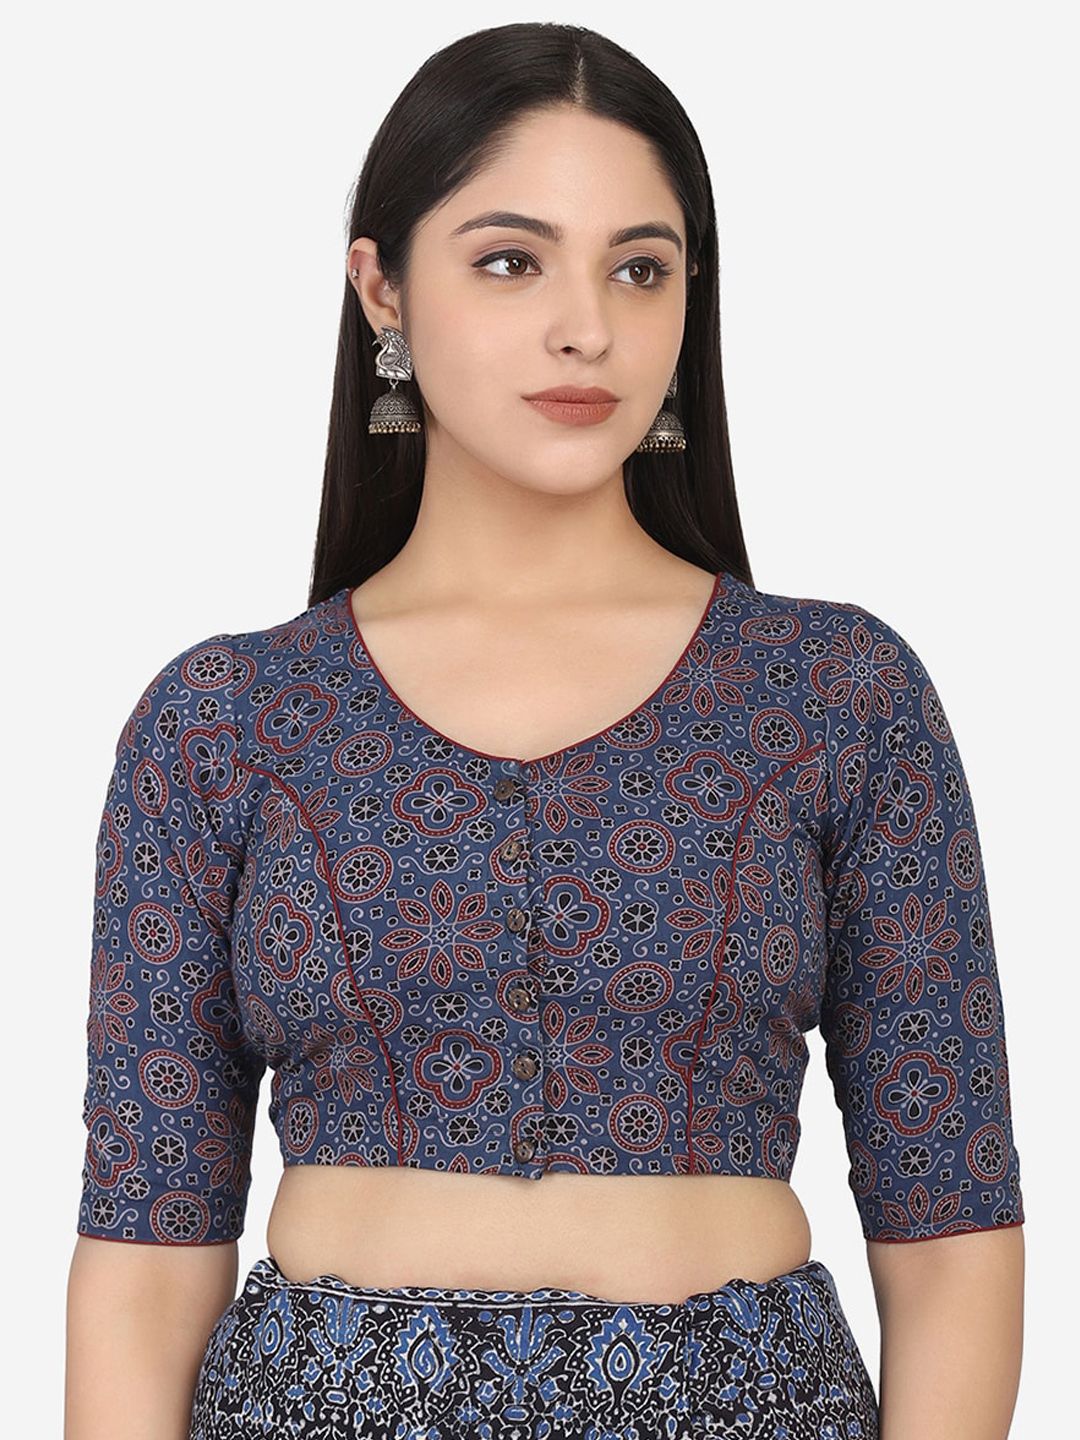 THE WEAVE TRAVELLER Blue & Red Ajrakh Block Printed Cotton Ready To Wear Saree Blouse Price in India